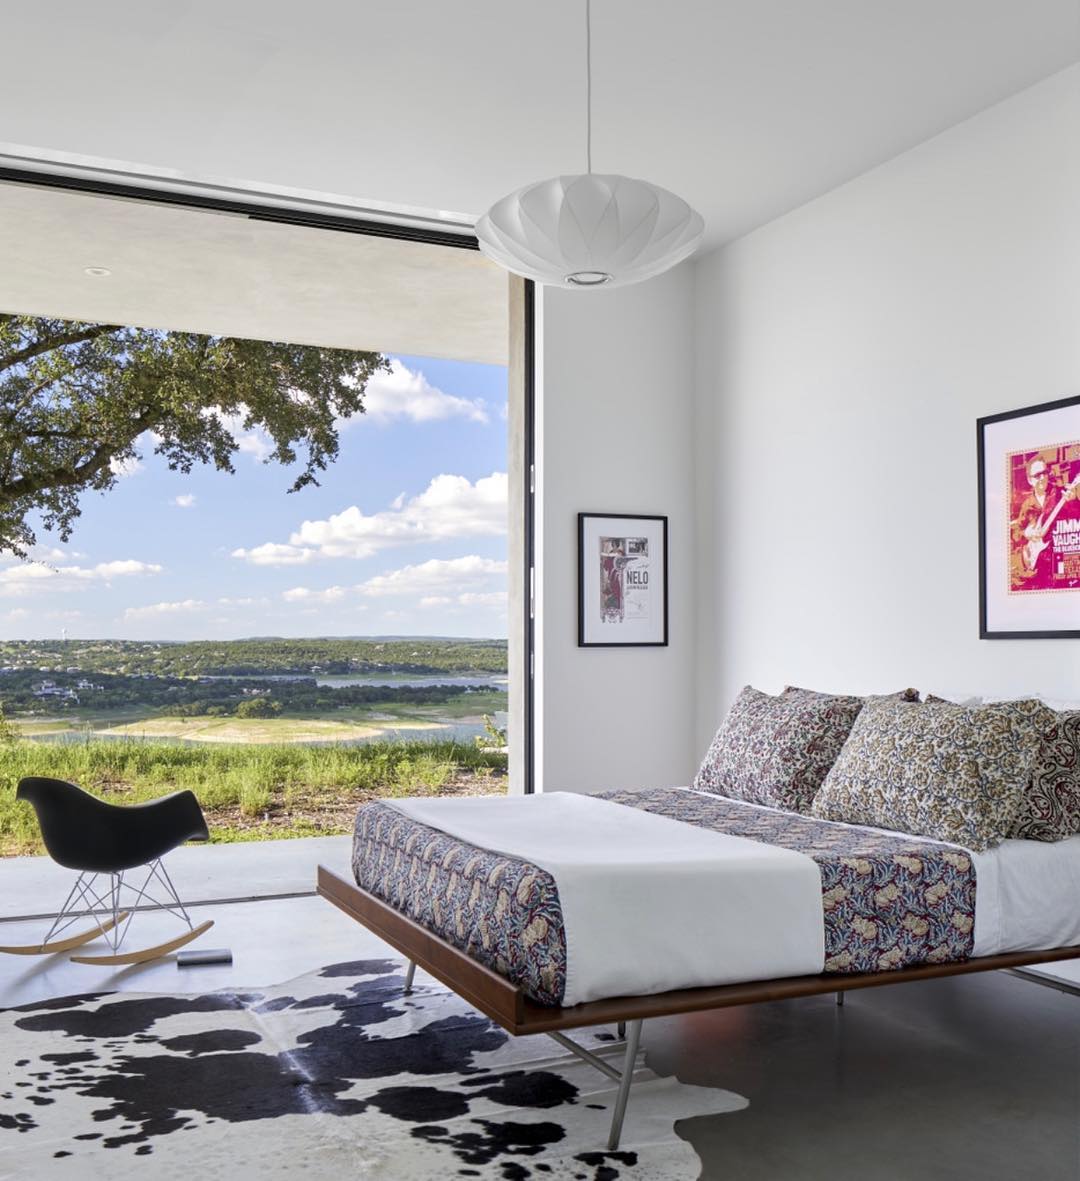 Rocking mid-century style overlooking the Texas Hill Country. That’s what our clients get to enjoy in their home Built by @foursquarebuilders Photo by @drorbaldingerphotographer Designed by @dc_architecture